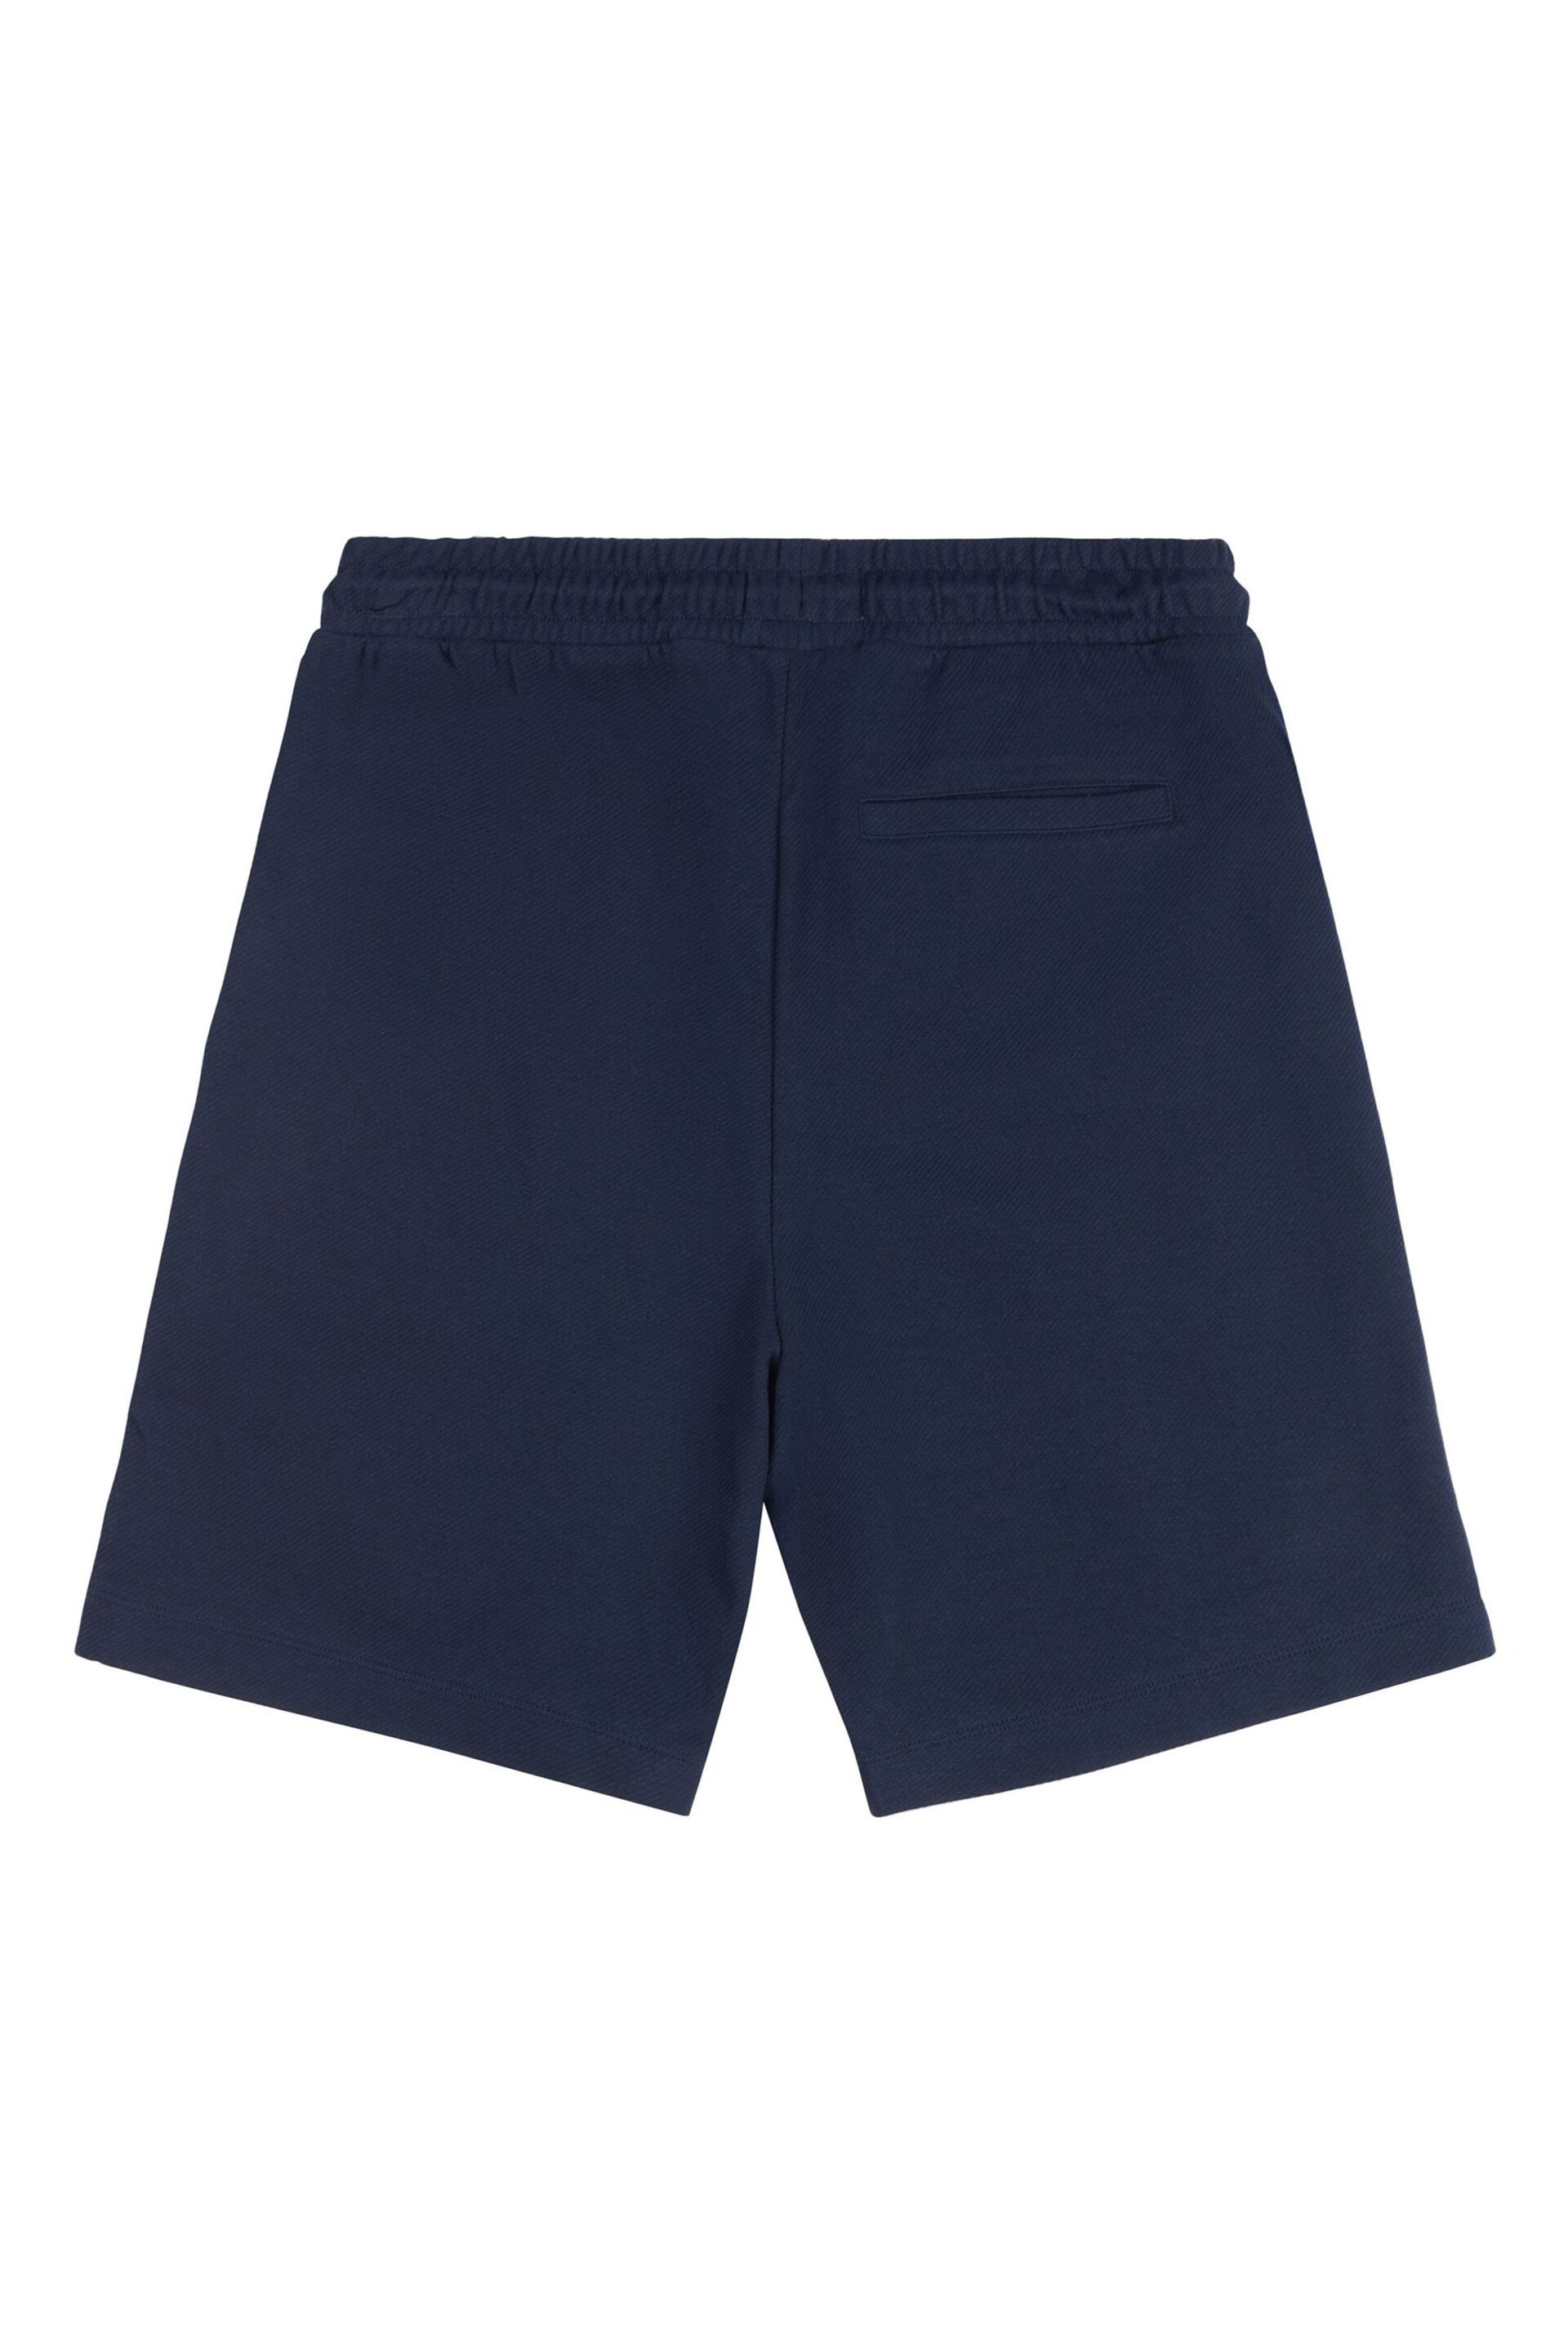 U.S. Polo Assn. Mens Blue Classic Fit Pin Tuck Shorts - Image 6 of 7